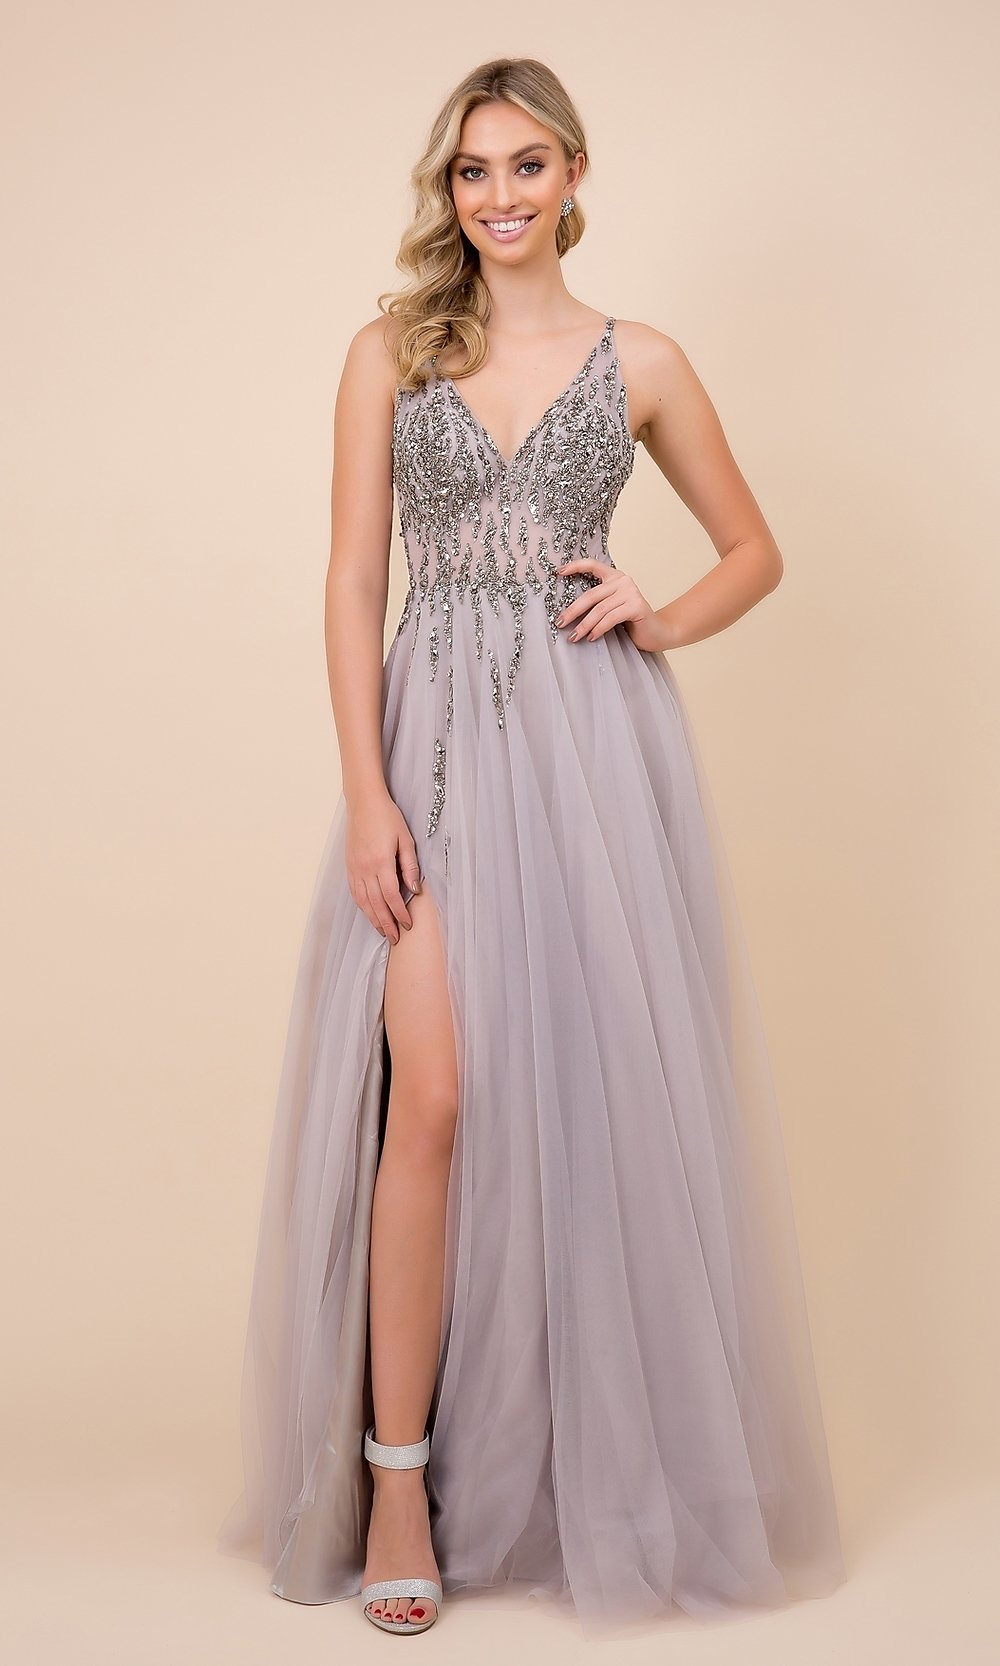 Long Prom Dress with Embellished Sheer Bodice